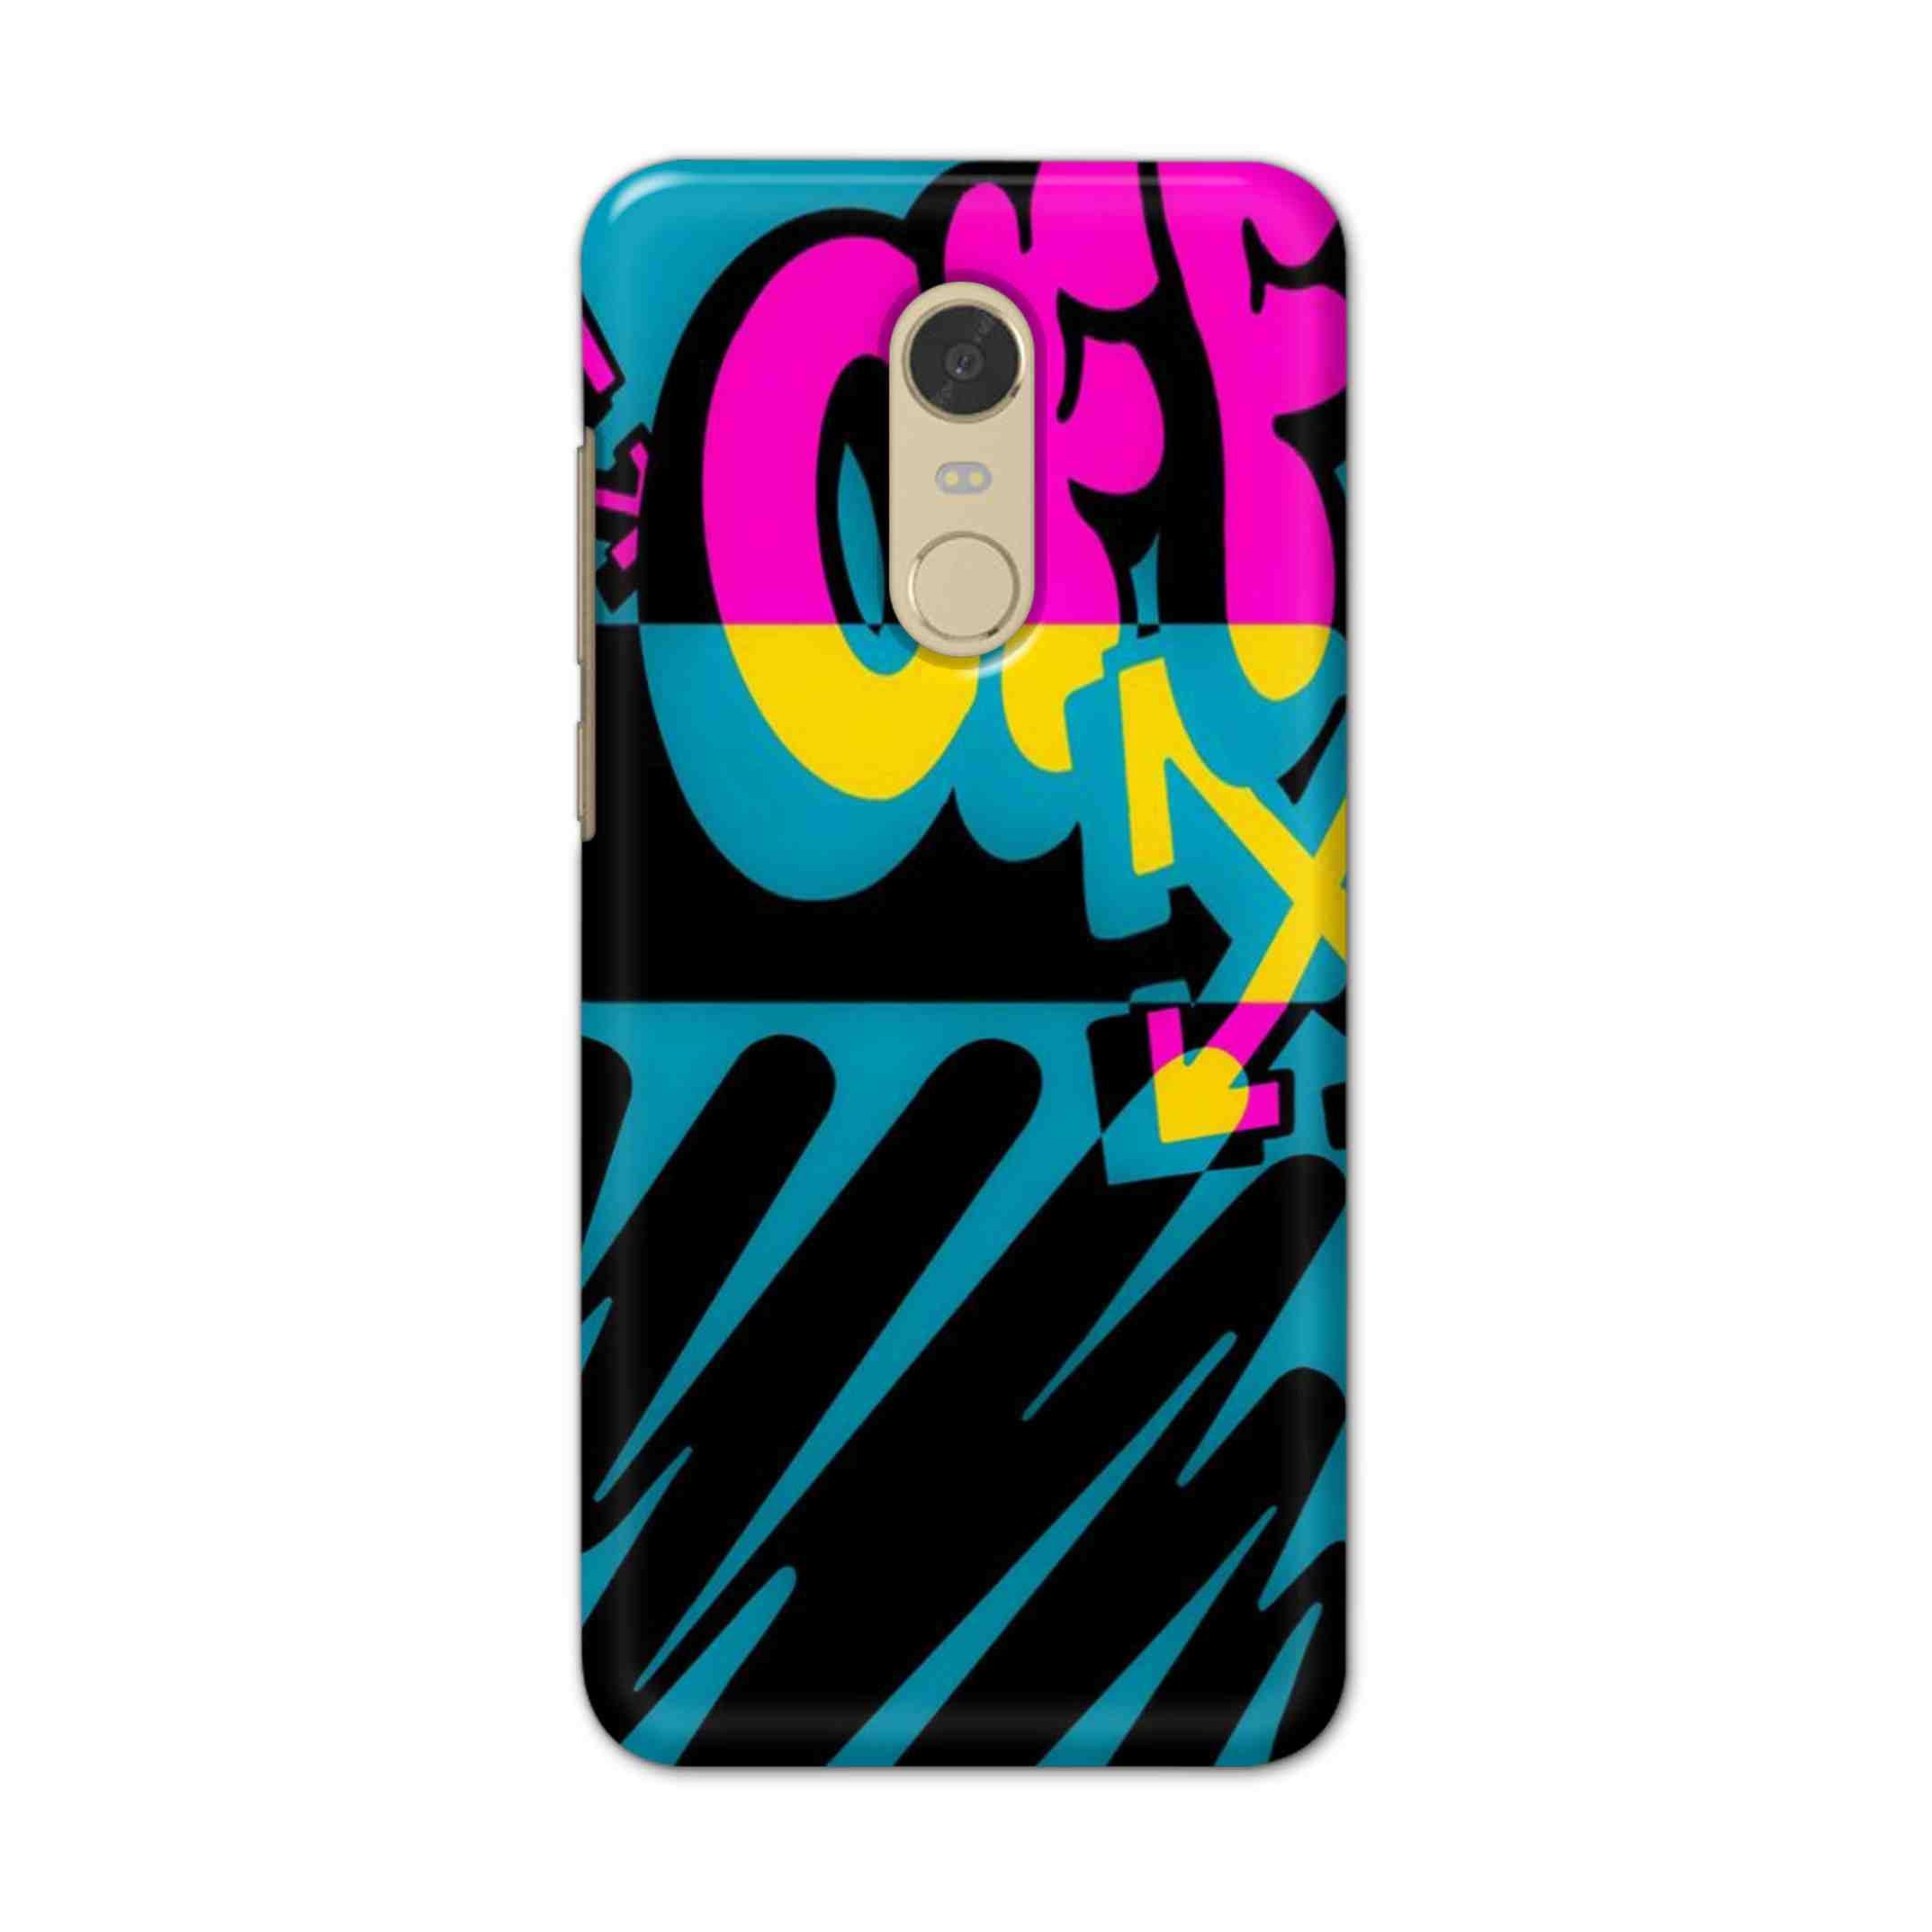 Buy Off Hard Back Mobile Phone Case/Cover For Redmi Note 6 Online